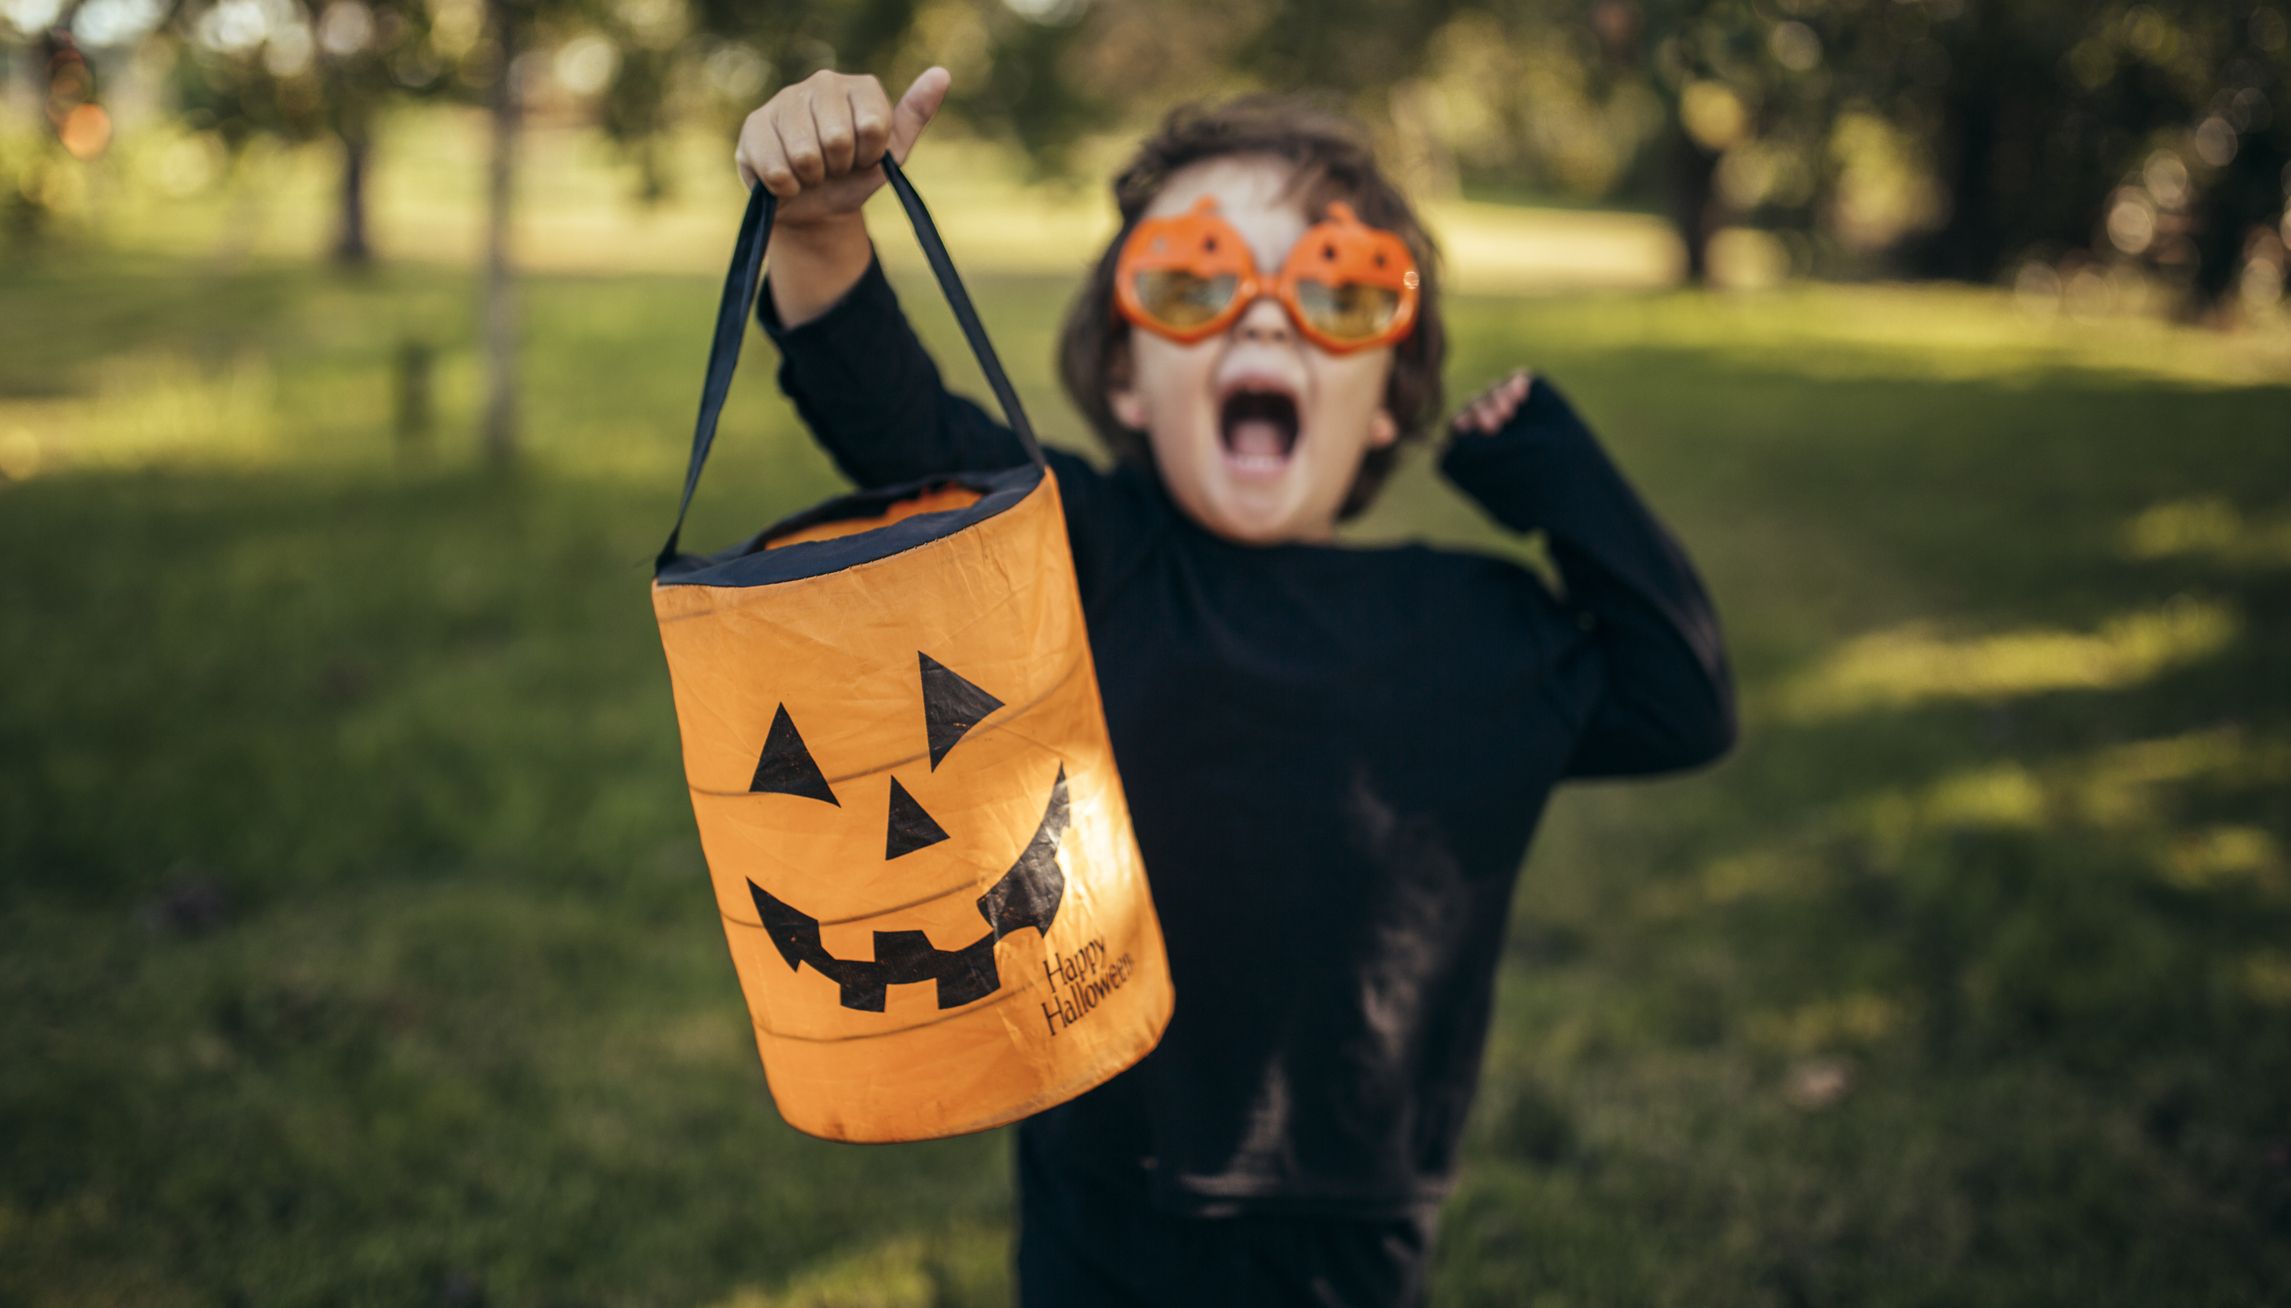 50 Best Halloween Quotes 2023 - Spooky Sayings to Wish a Happy Halloween